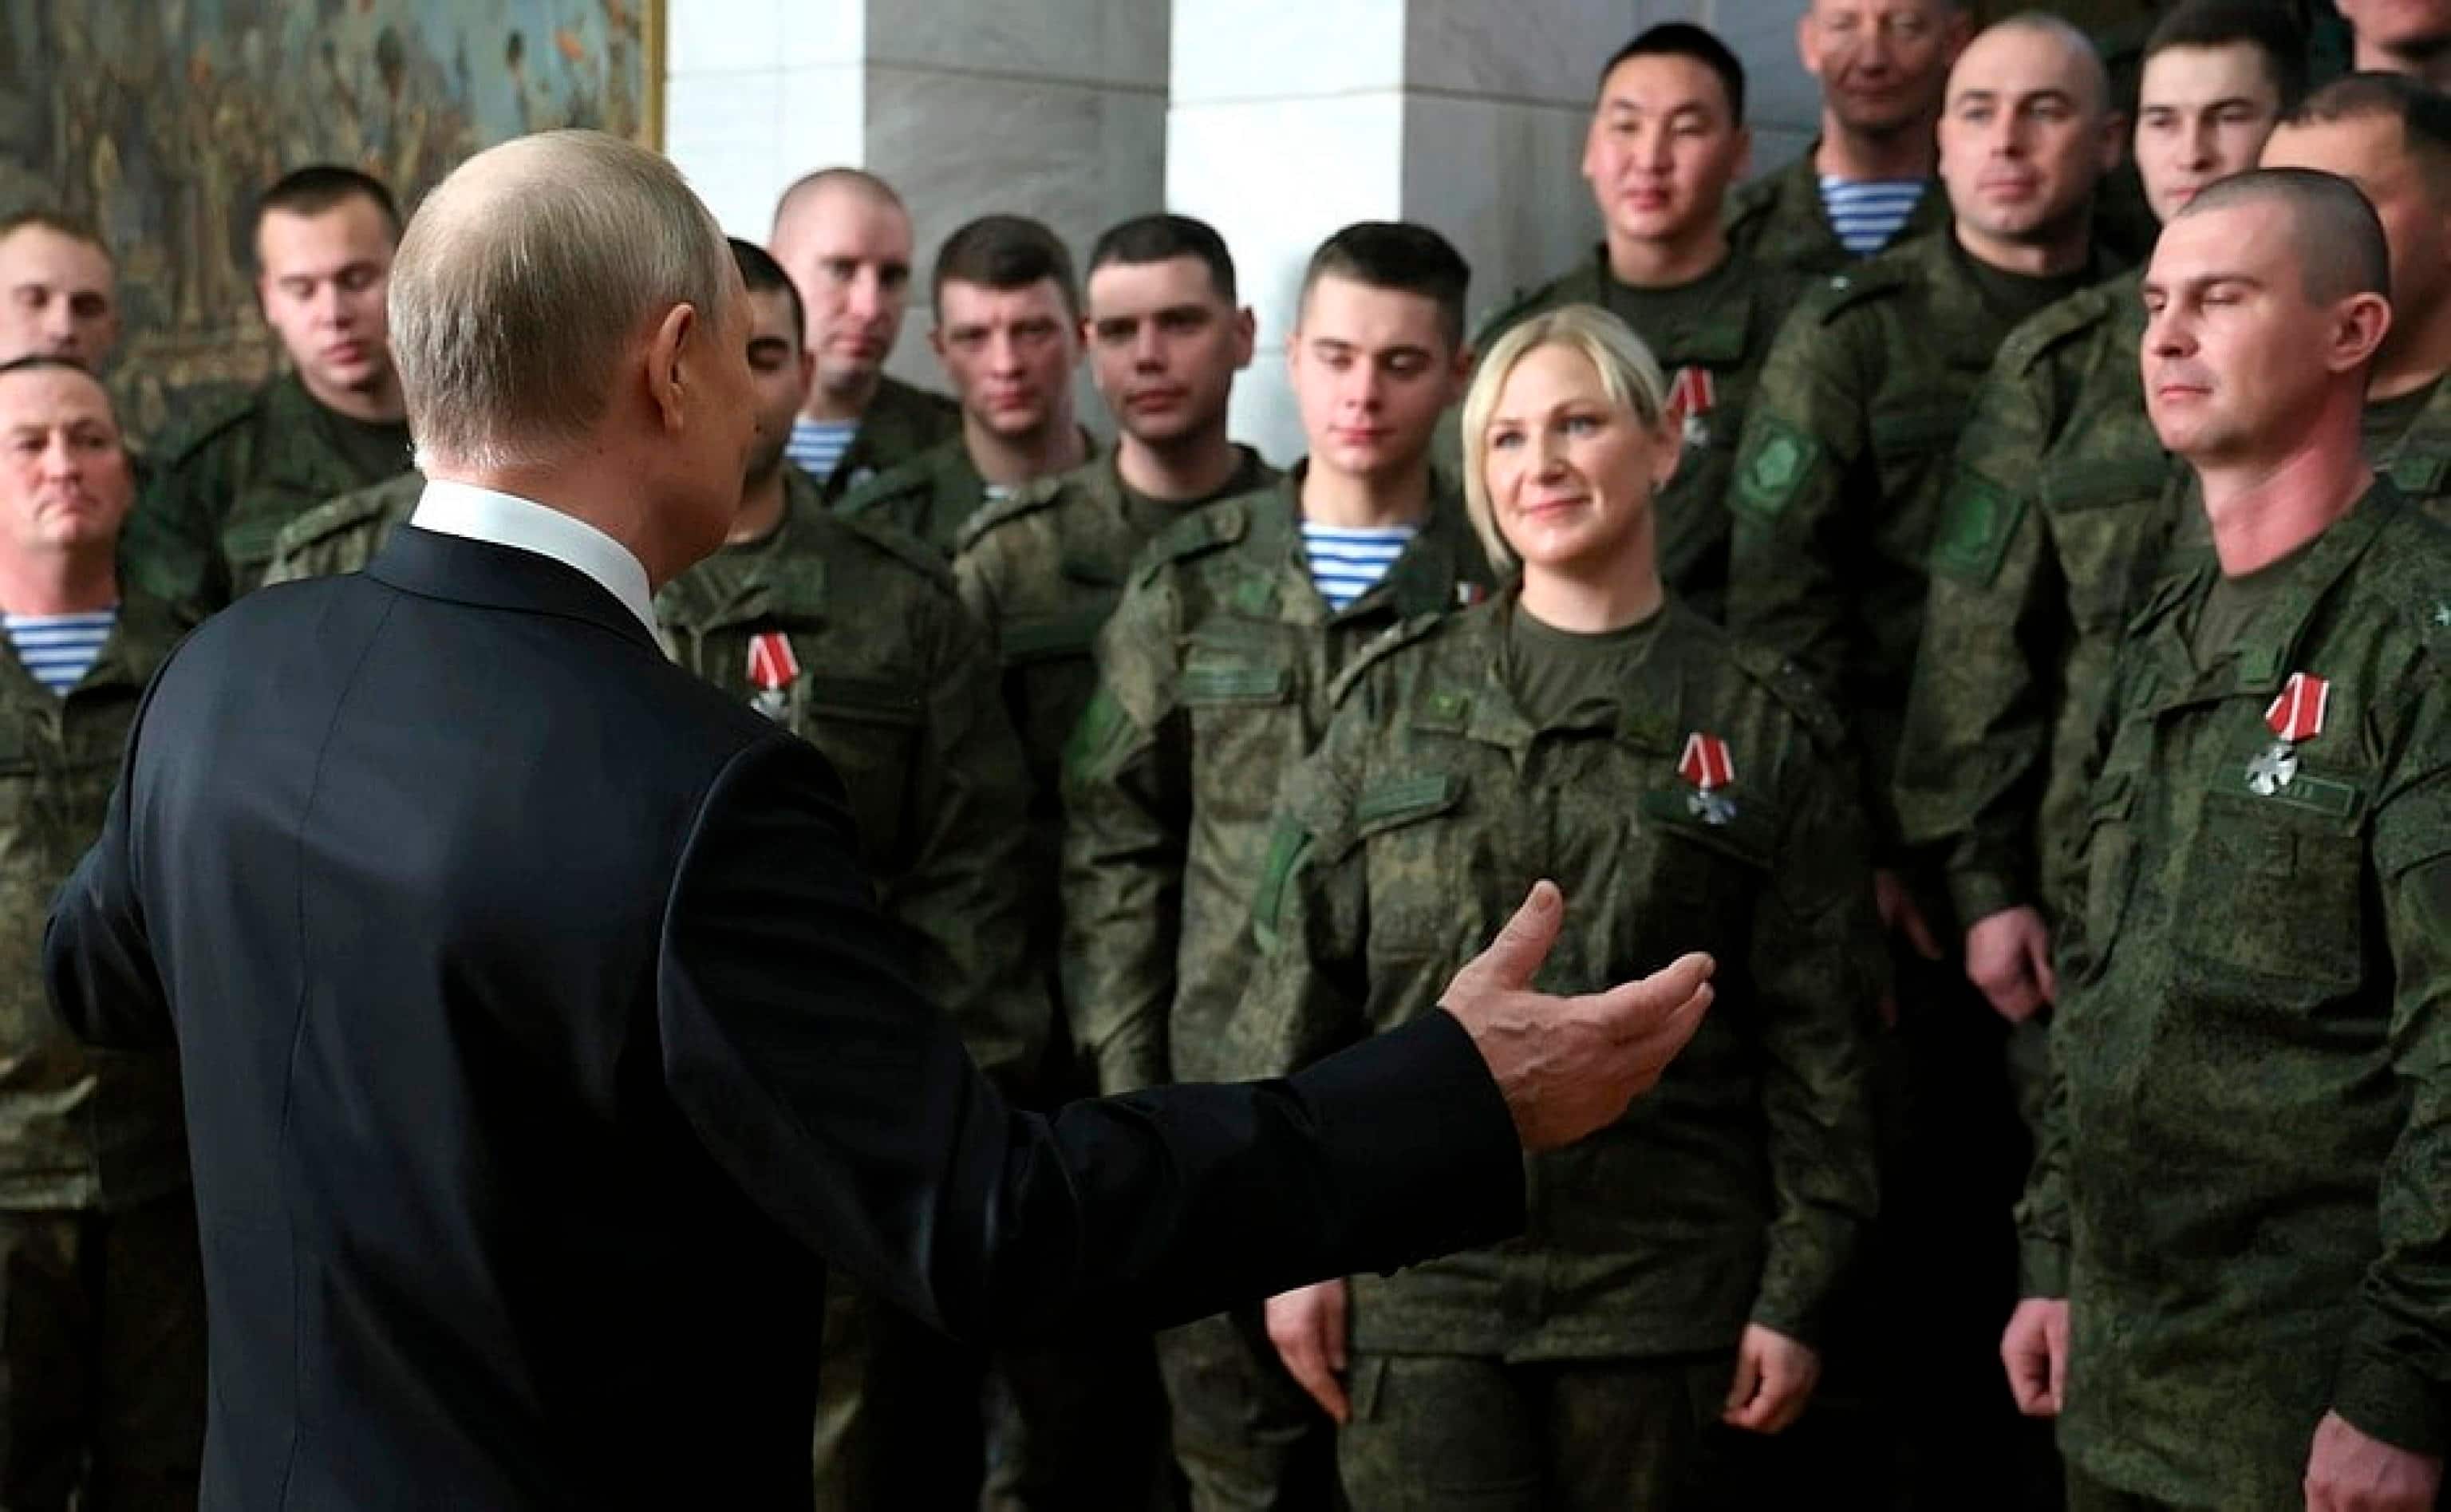 epa10384207 A handout still image provided  by the Russian Defence ministry press-service shows Russian President Vladimir Putin speaking with Russian servicemen during award ceremony as he visits the Southern Military District headquarter in Rostov on Don, in Rostov region, Russia, 31 December 2022.  EPA/RUSSIAN DEFENCE MINISTRY PRESS SERVICE/HANDOUT HANDOUT EDITORIAL USE ONLY/NO SALES HANDOUT EDITORIAL USE ONLY/NO SALES